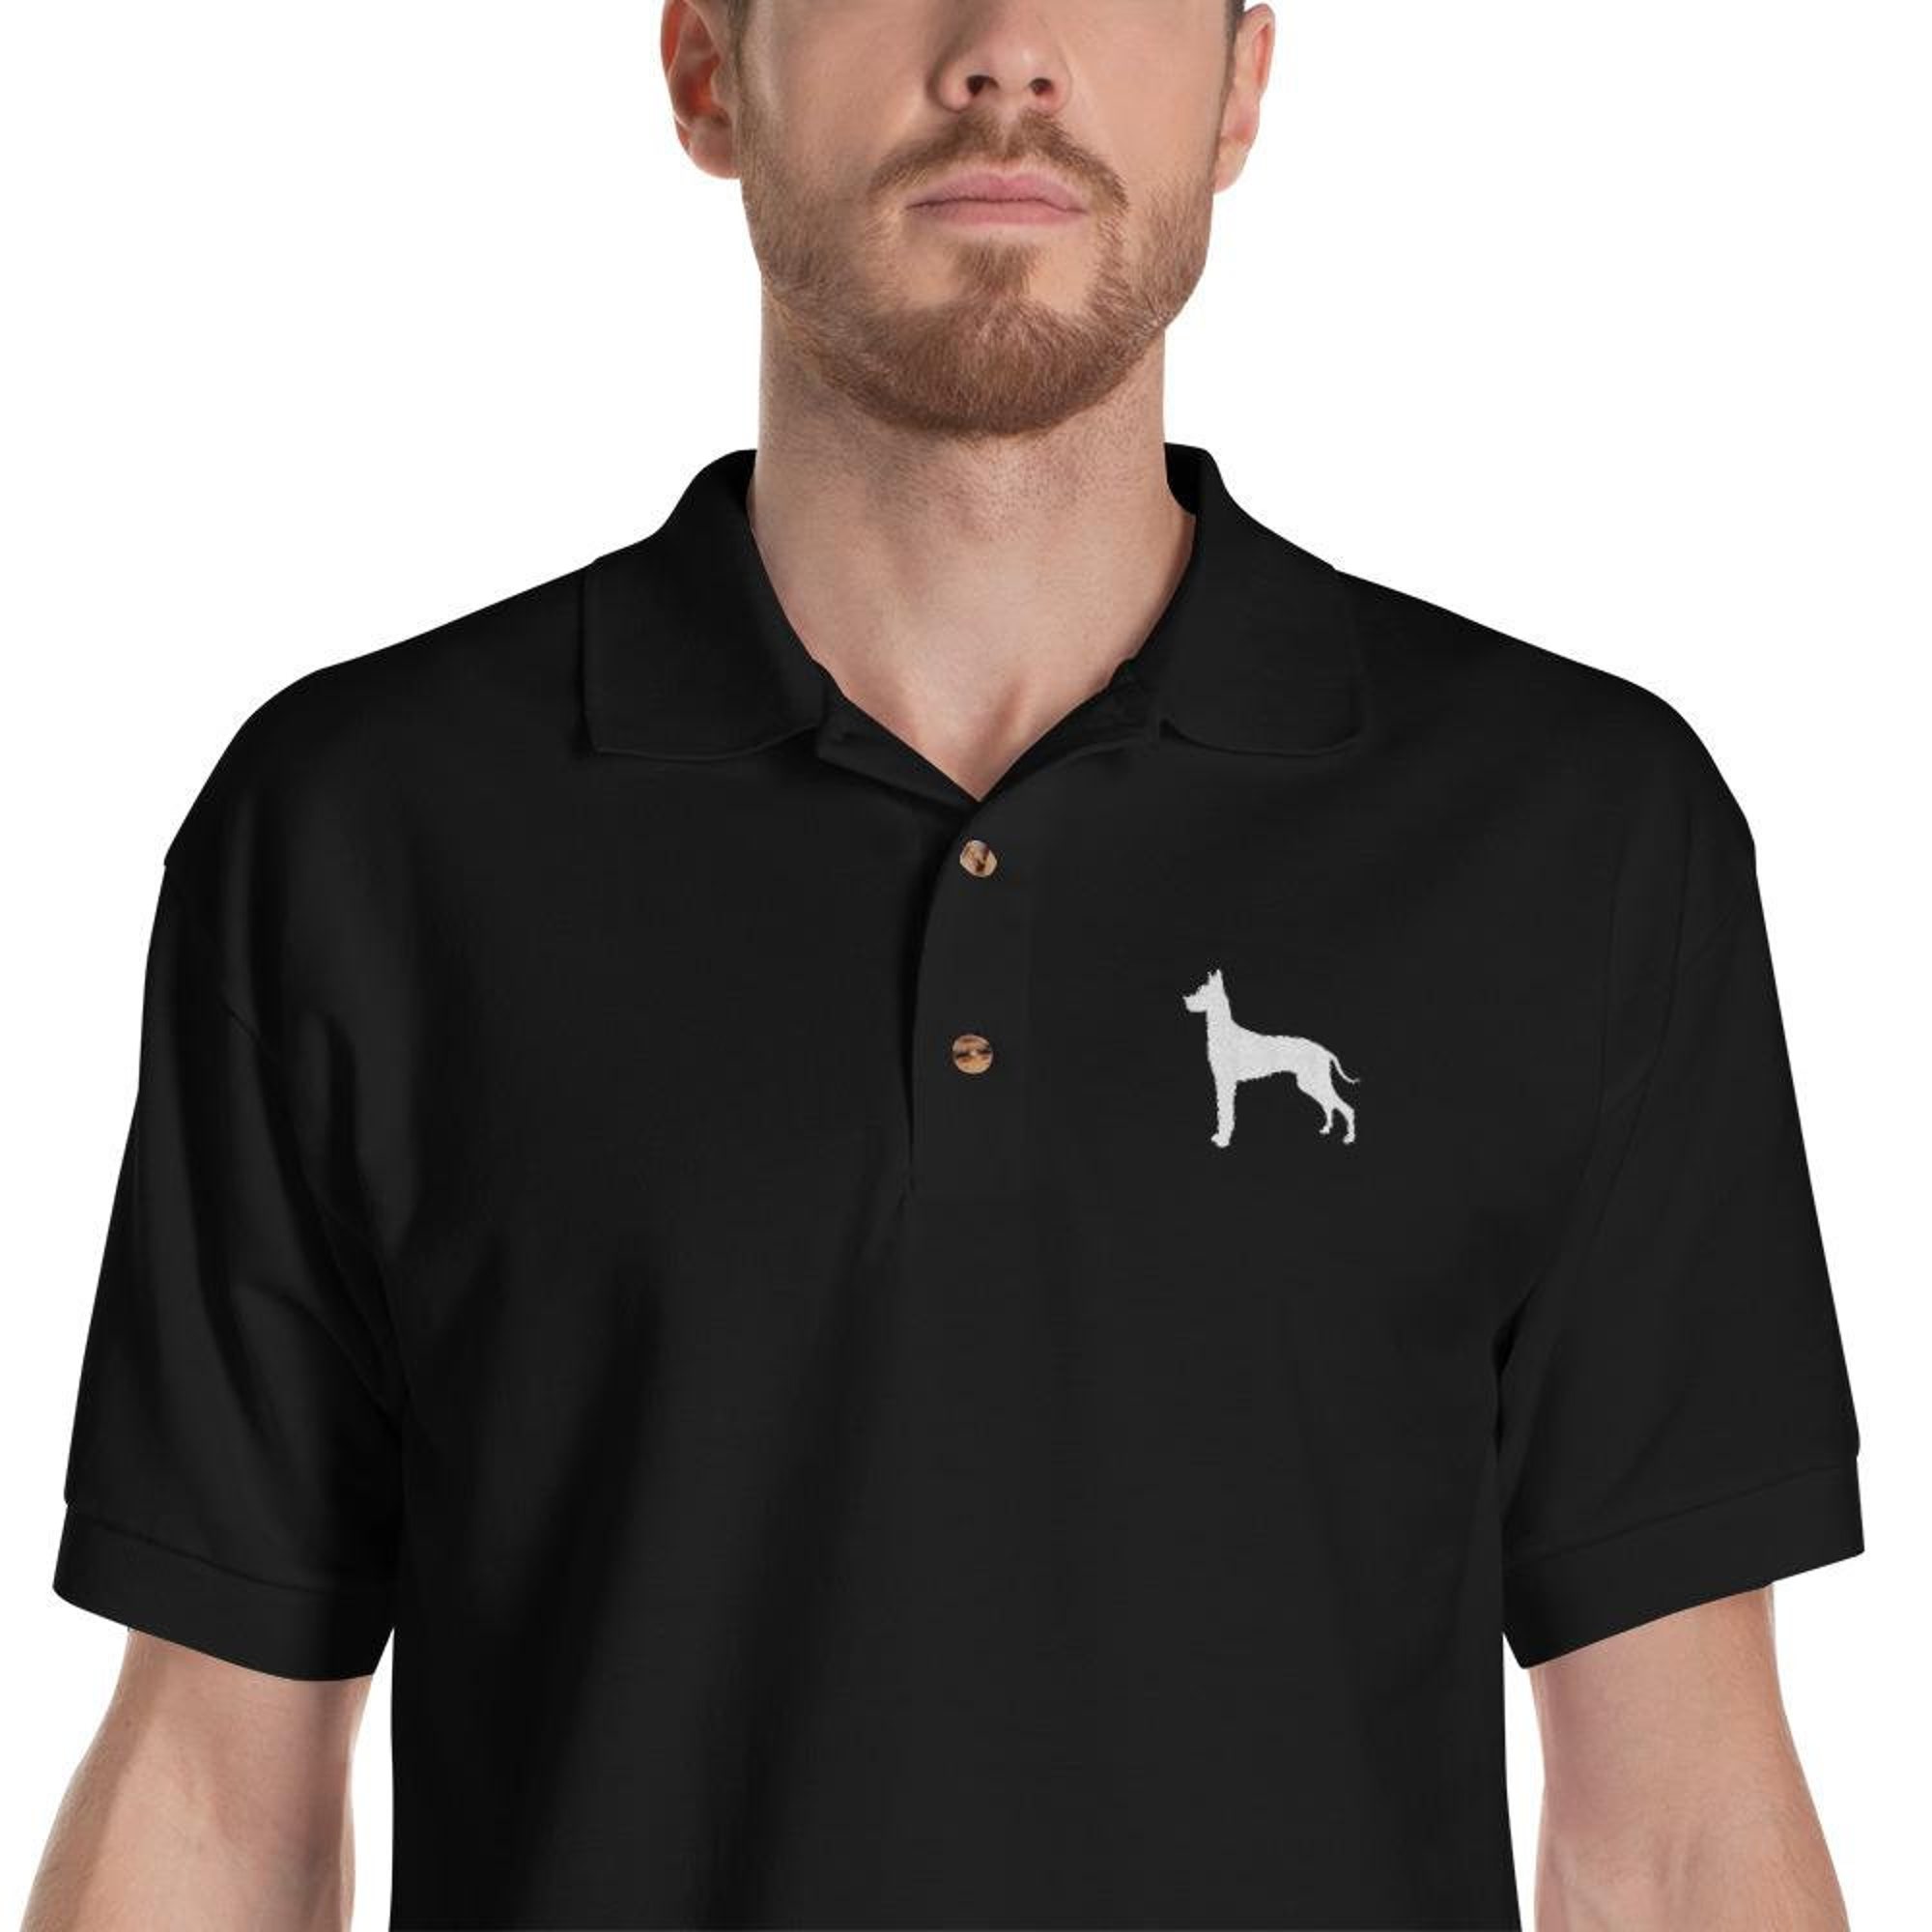 Great Dane Embroidered Polo Shirt